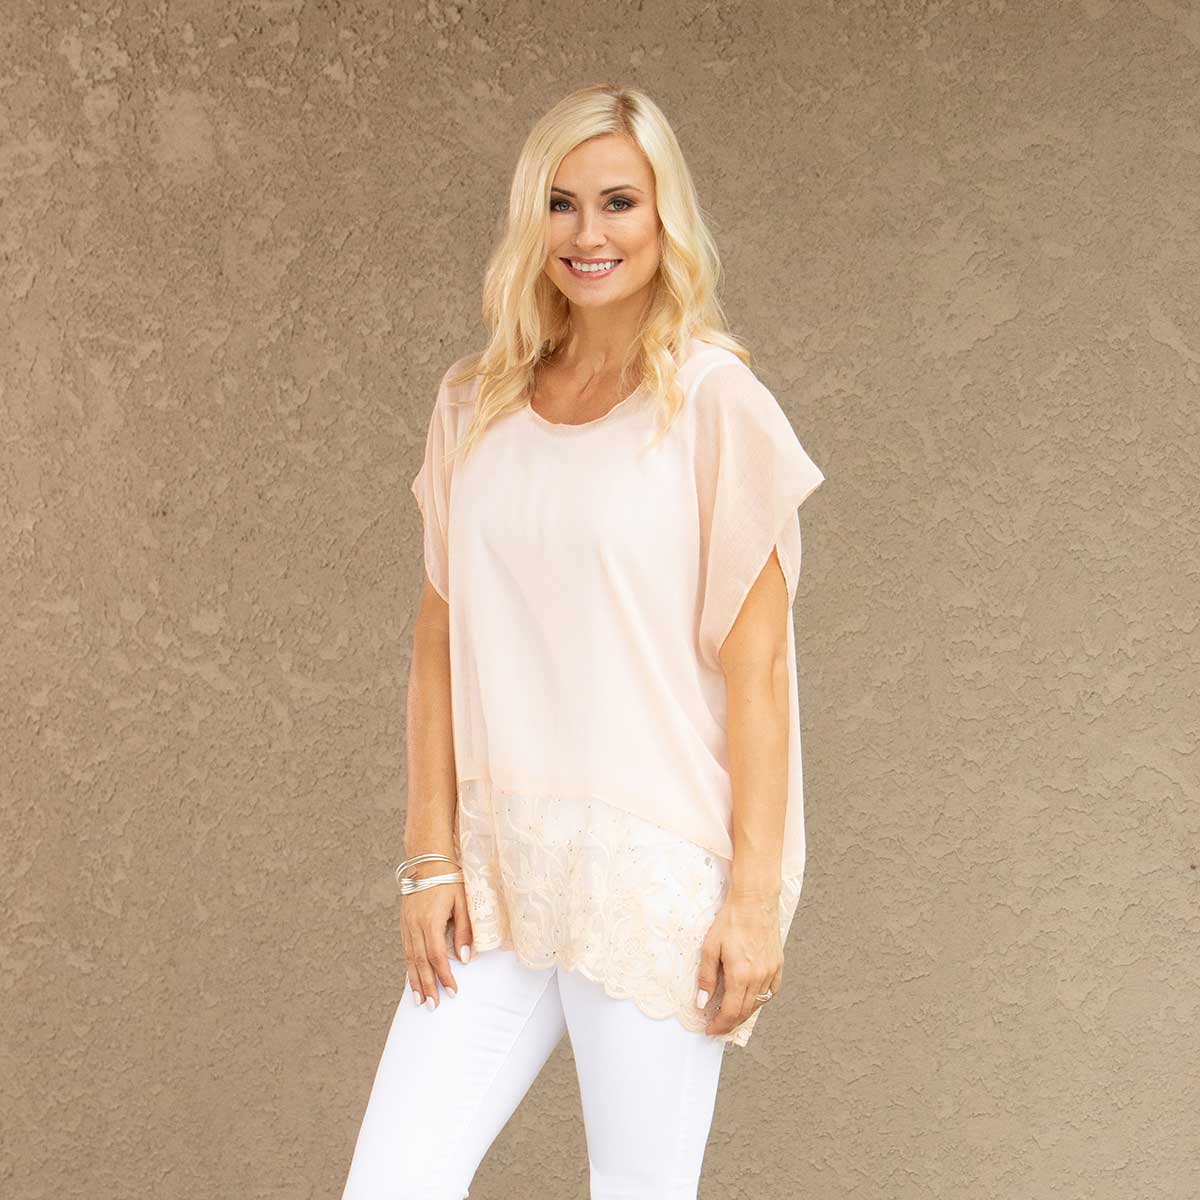 Peach Tunic with Lace and Crystal Trim 27"x30" 50sp